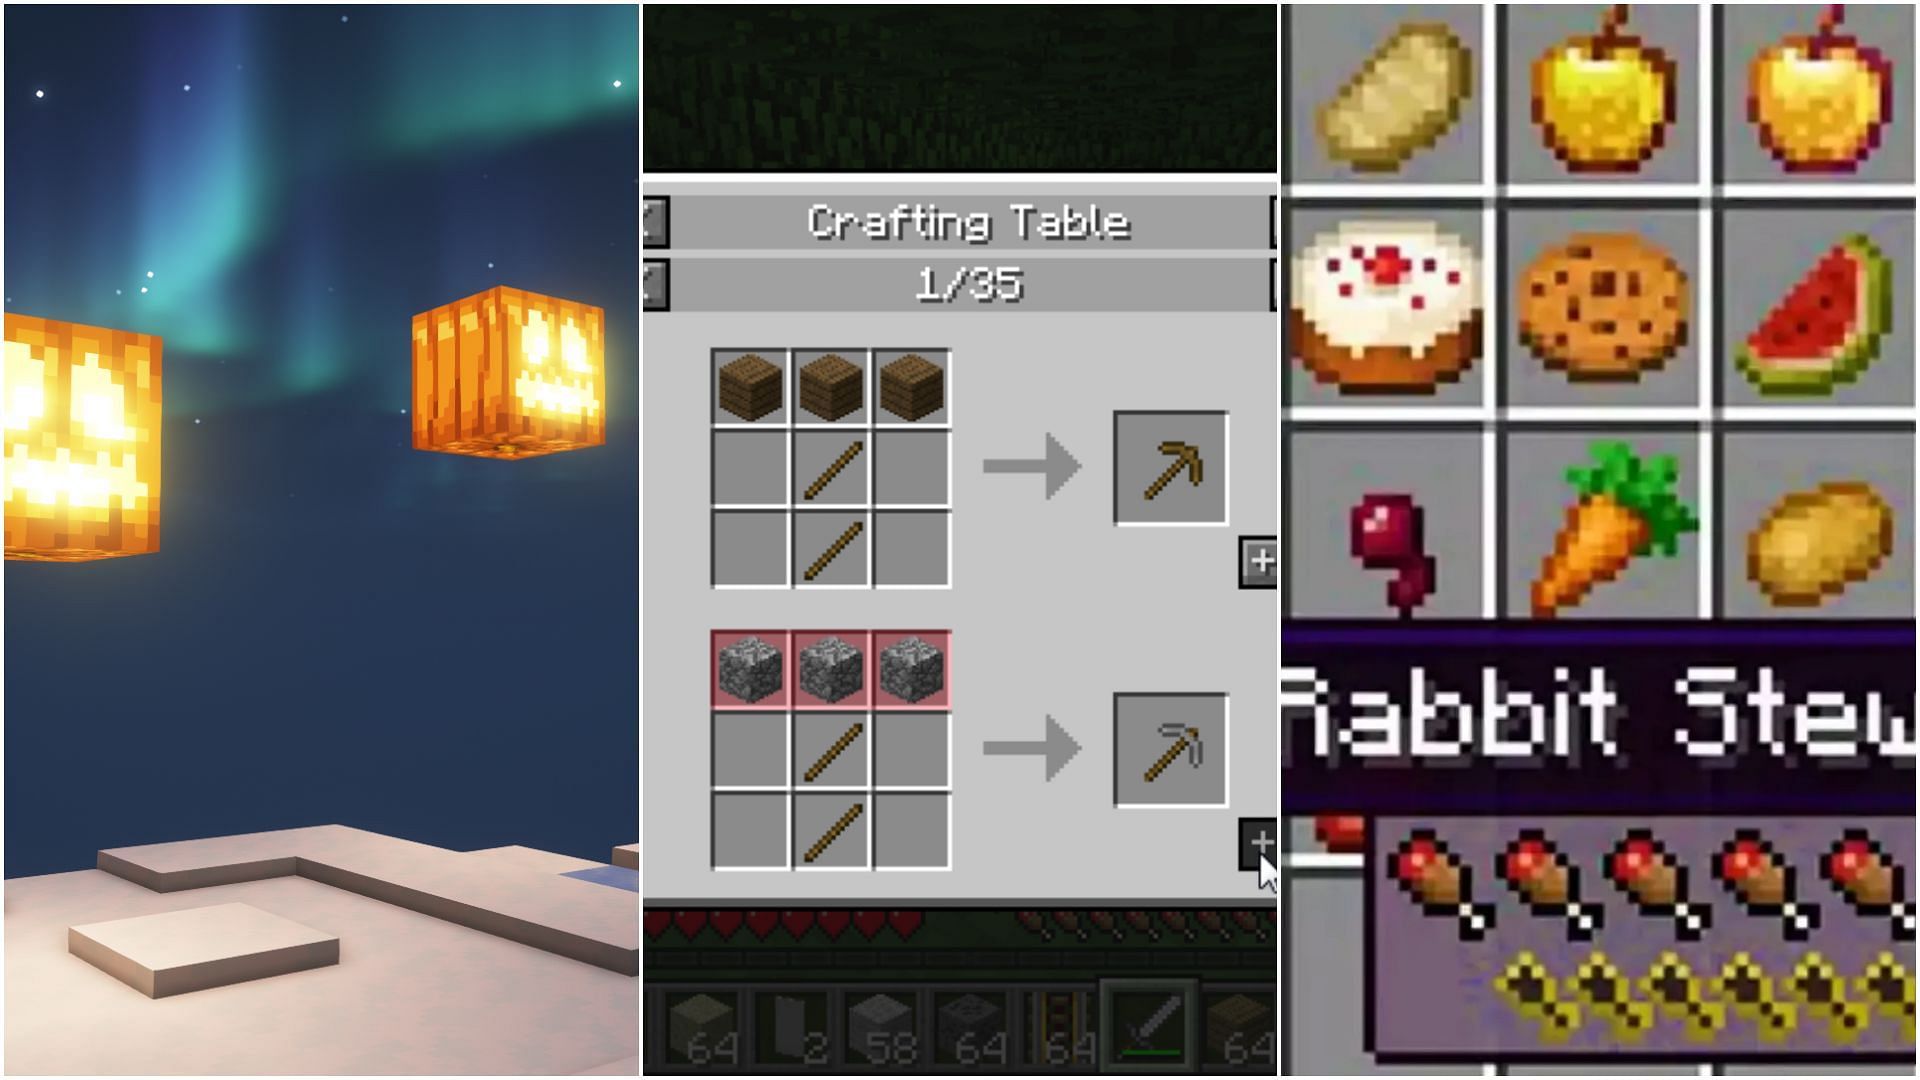 Loads of mod features can be added to Minecraft to improve the game